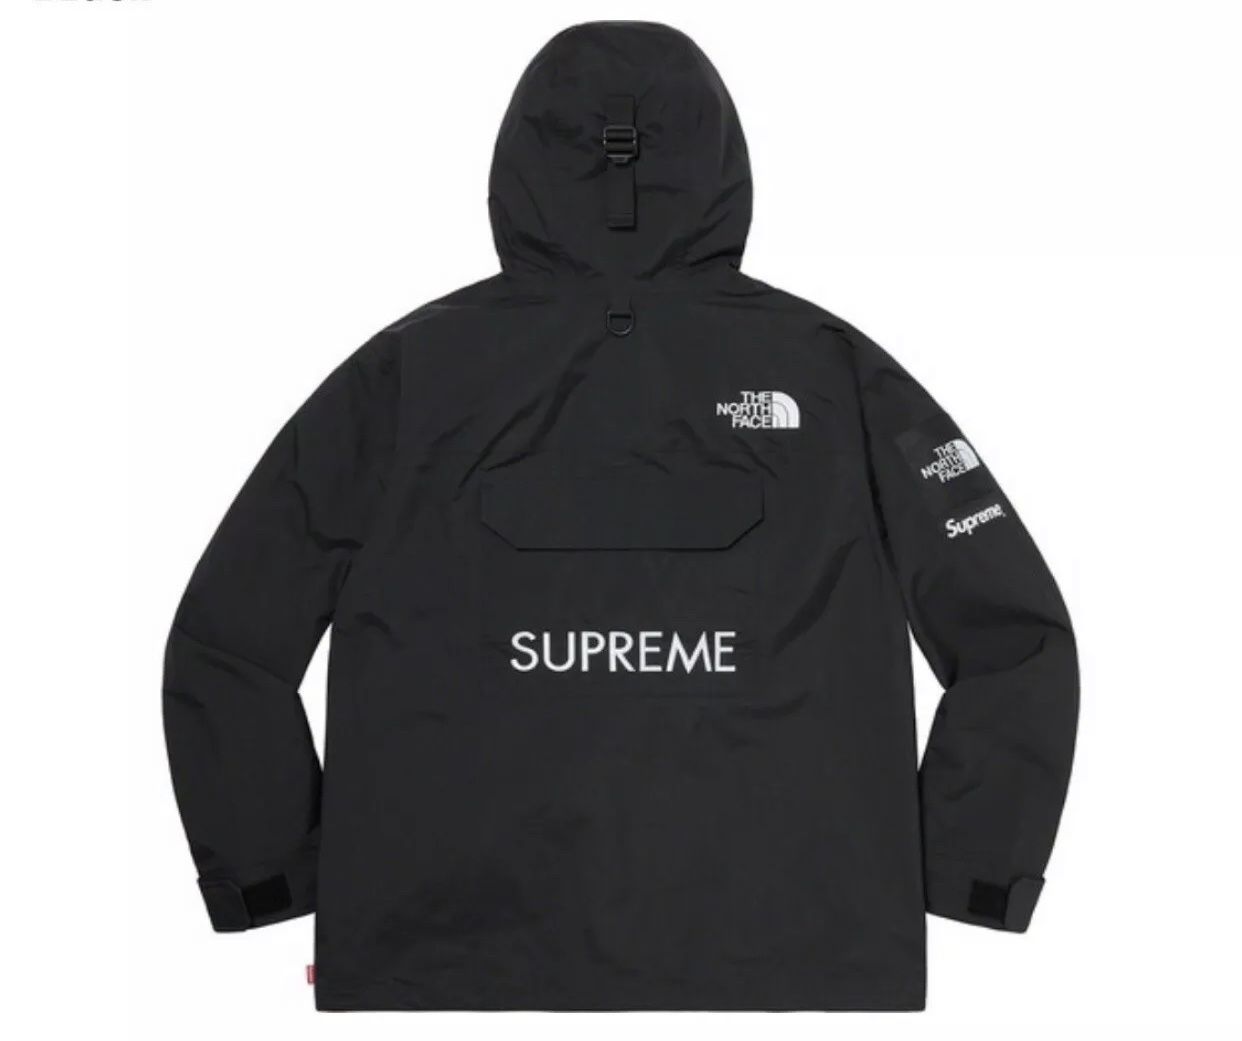 Supreme x North Face Jacket Size Small DS